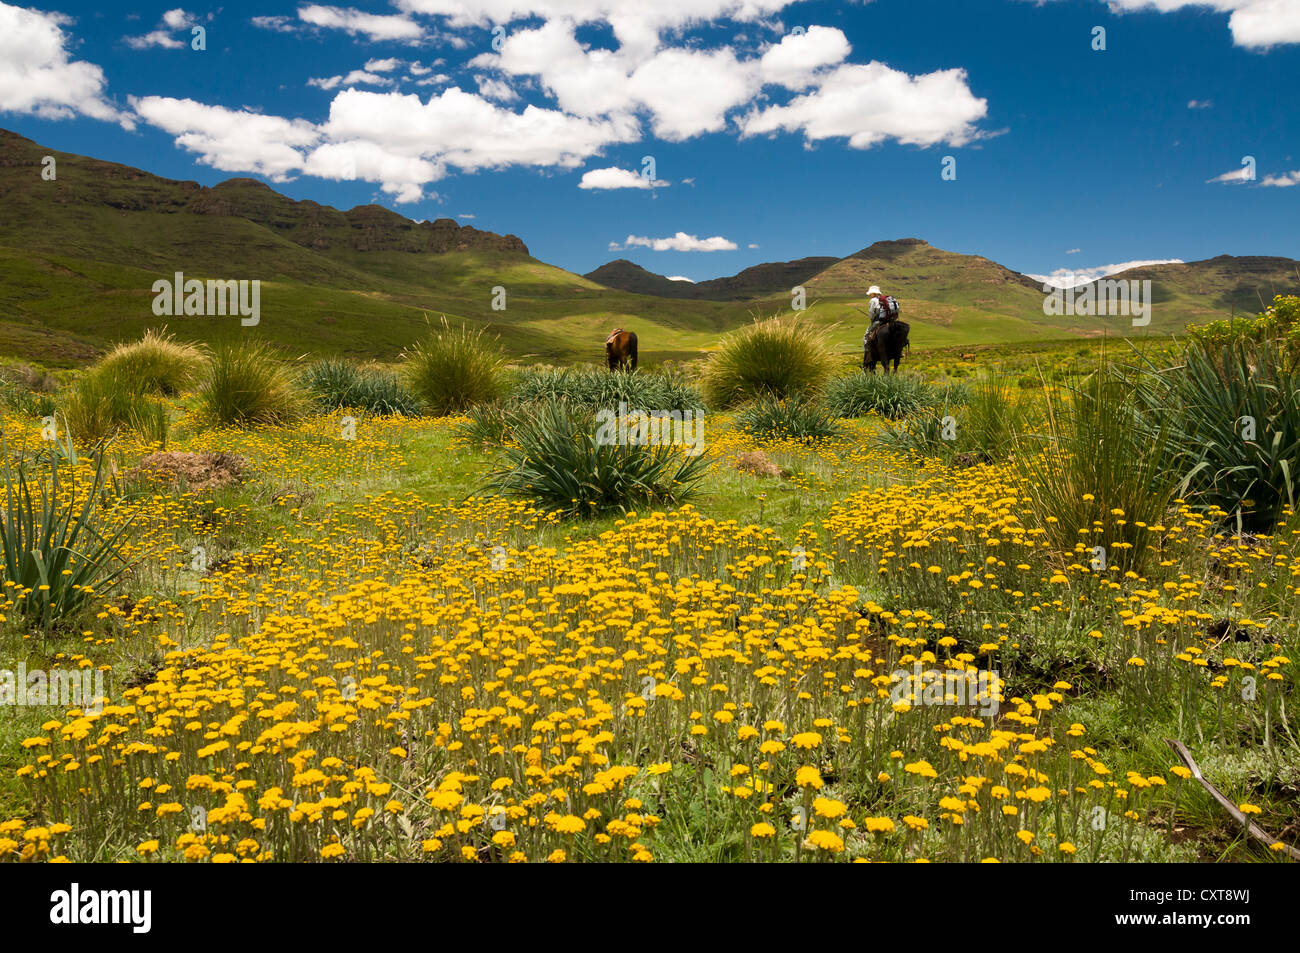 Woman riding across a meadow in the highlands, Drakensberg, Kingdom of Lesotho, southern Africa Stock Photo